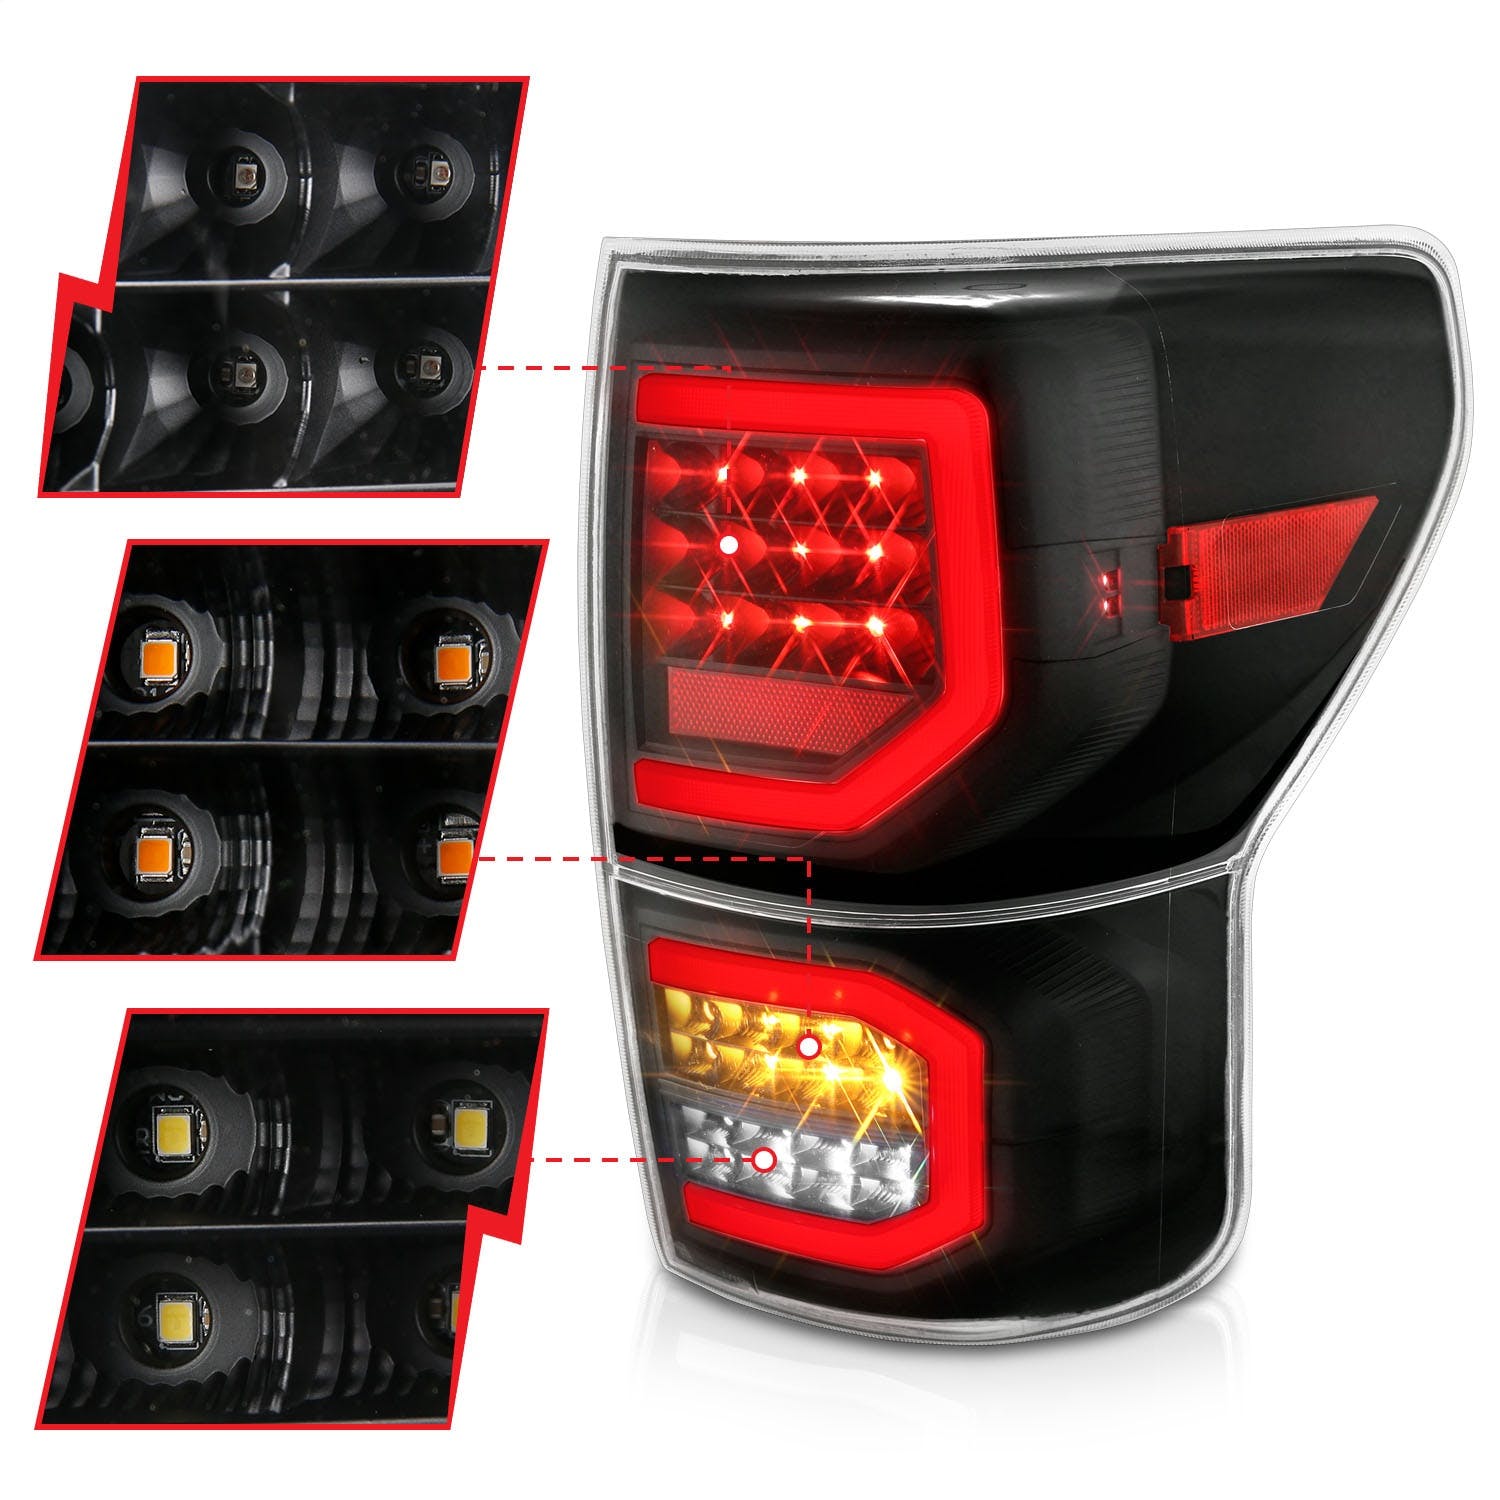 AnzoUSA 311336 LED Taillights Plank Style Black with Clear Lens